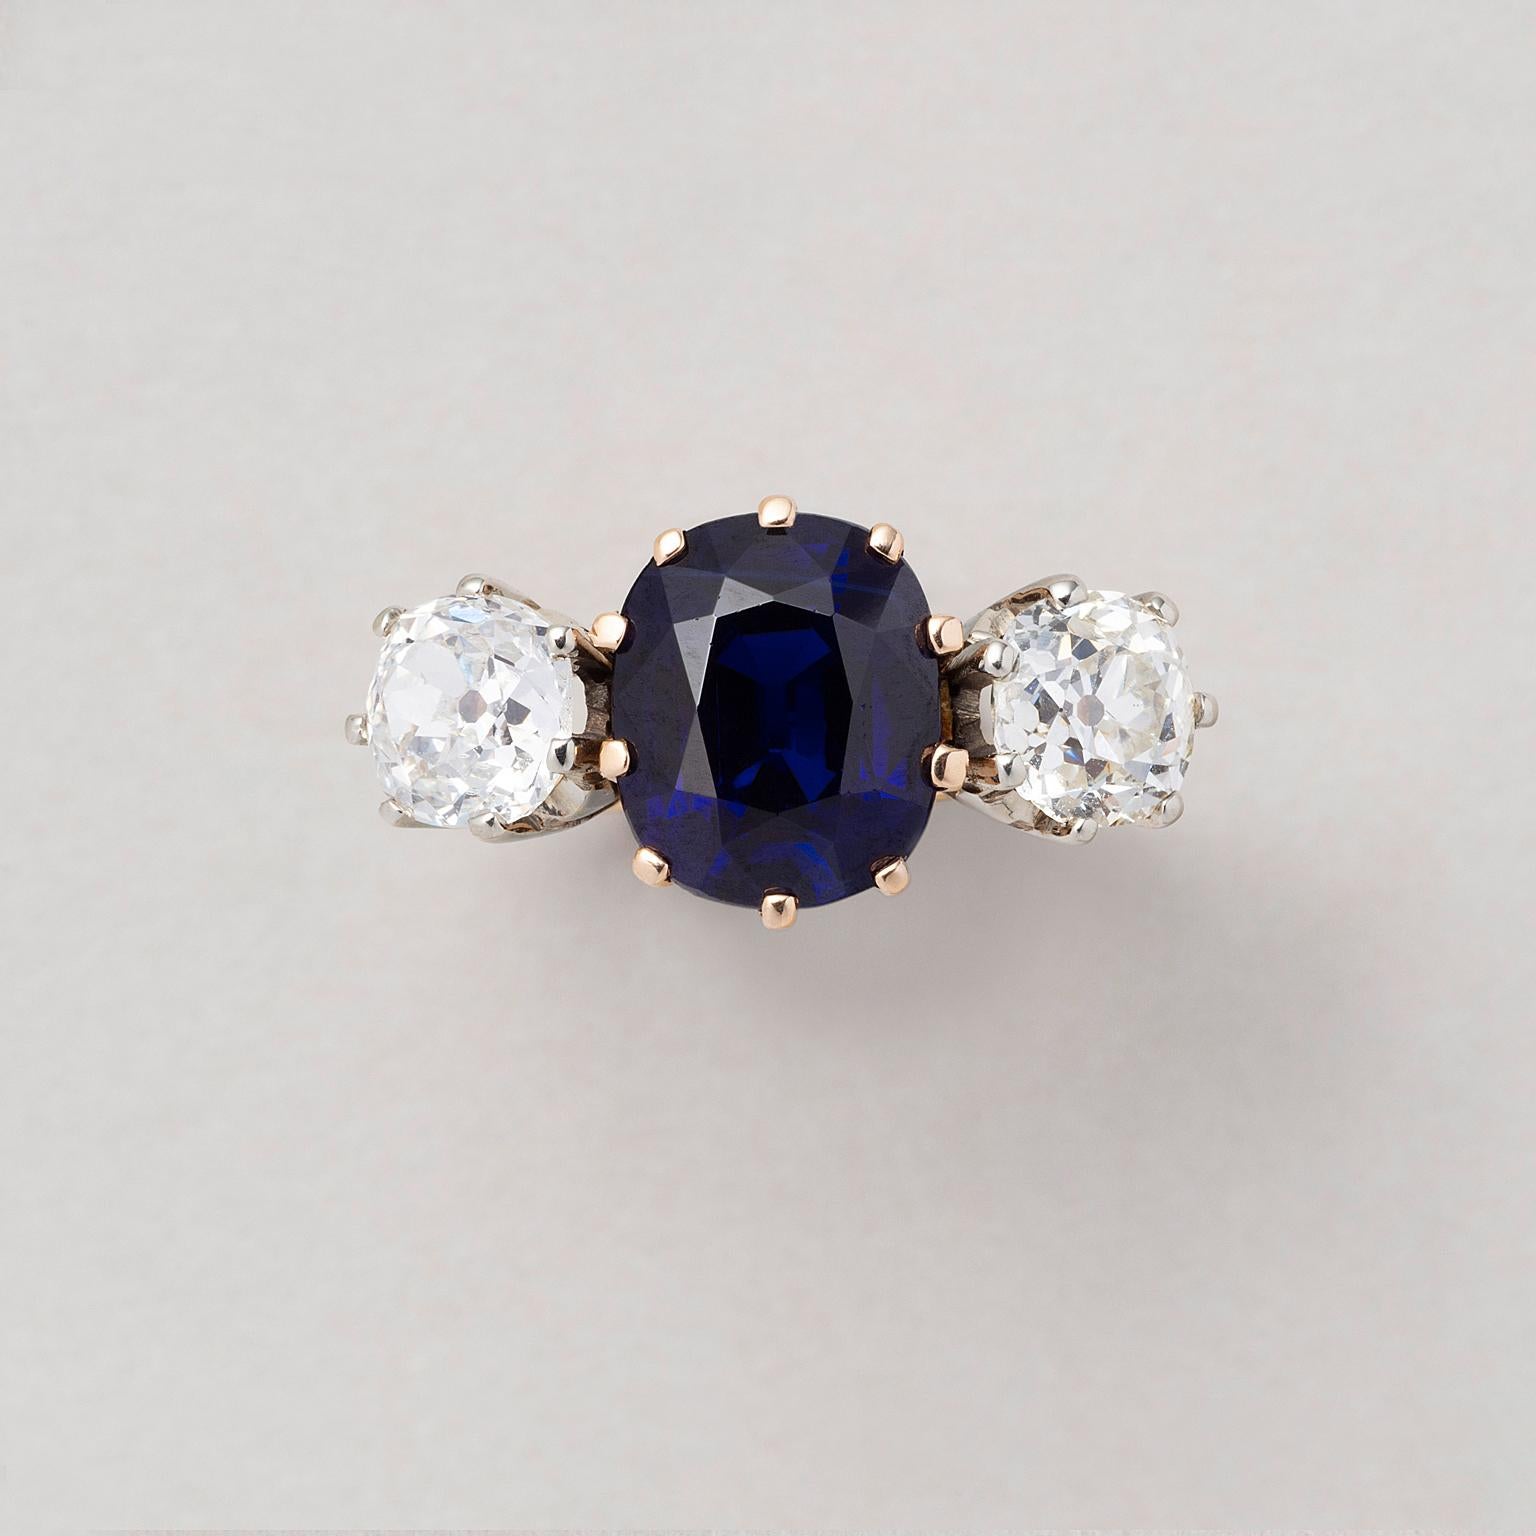  An 18 carat yellow and white gold three stone ring with a natural unenhanced cushion cut blue sapphire (3.91 carat, basaltic origin) with on each side a cushion cut diamond (each app. 0.85 carat, I, Vs-Si), Swiss.

Period: 1950-1960-1970
Ring size: